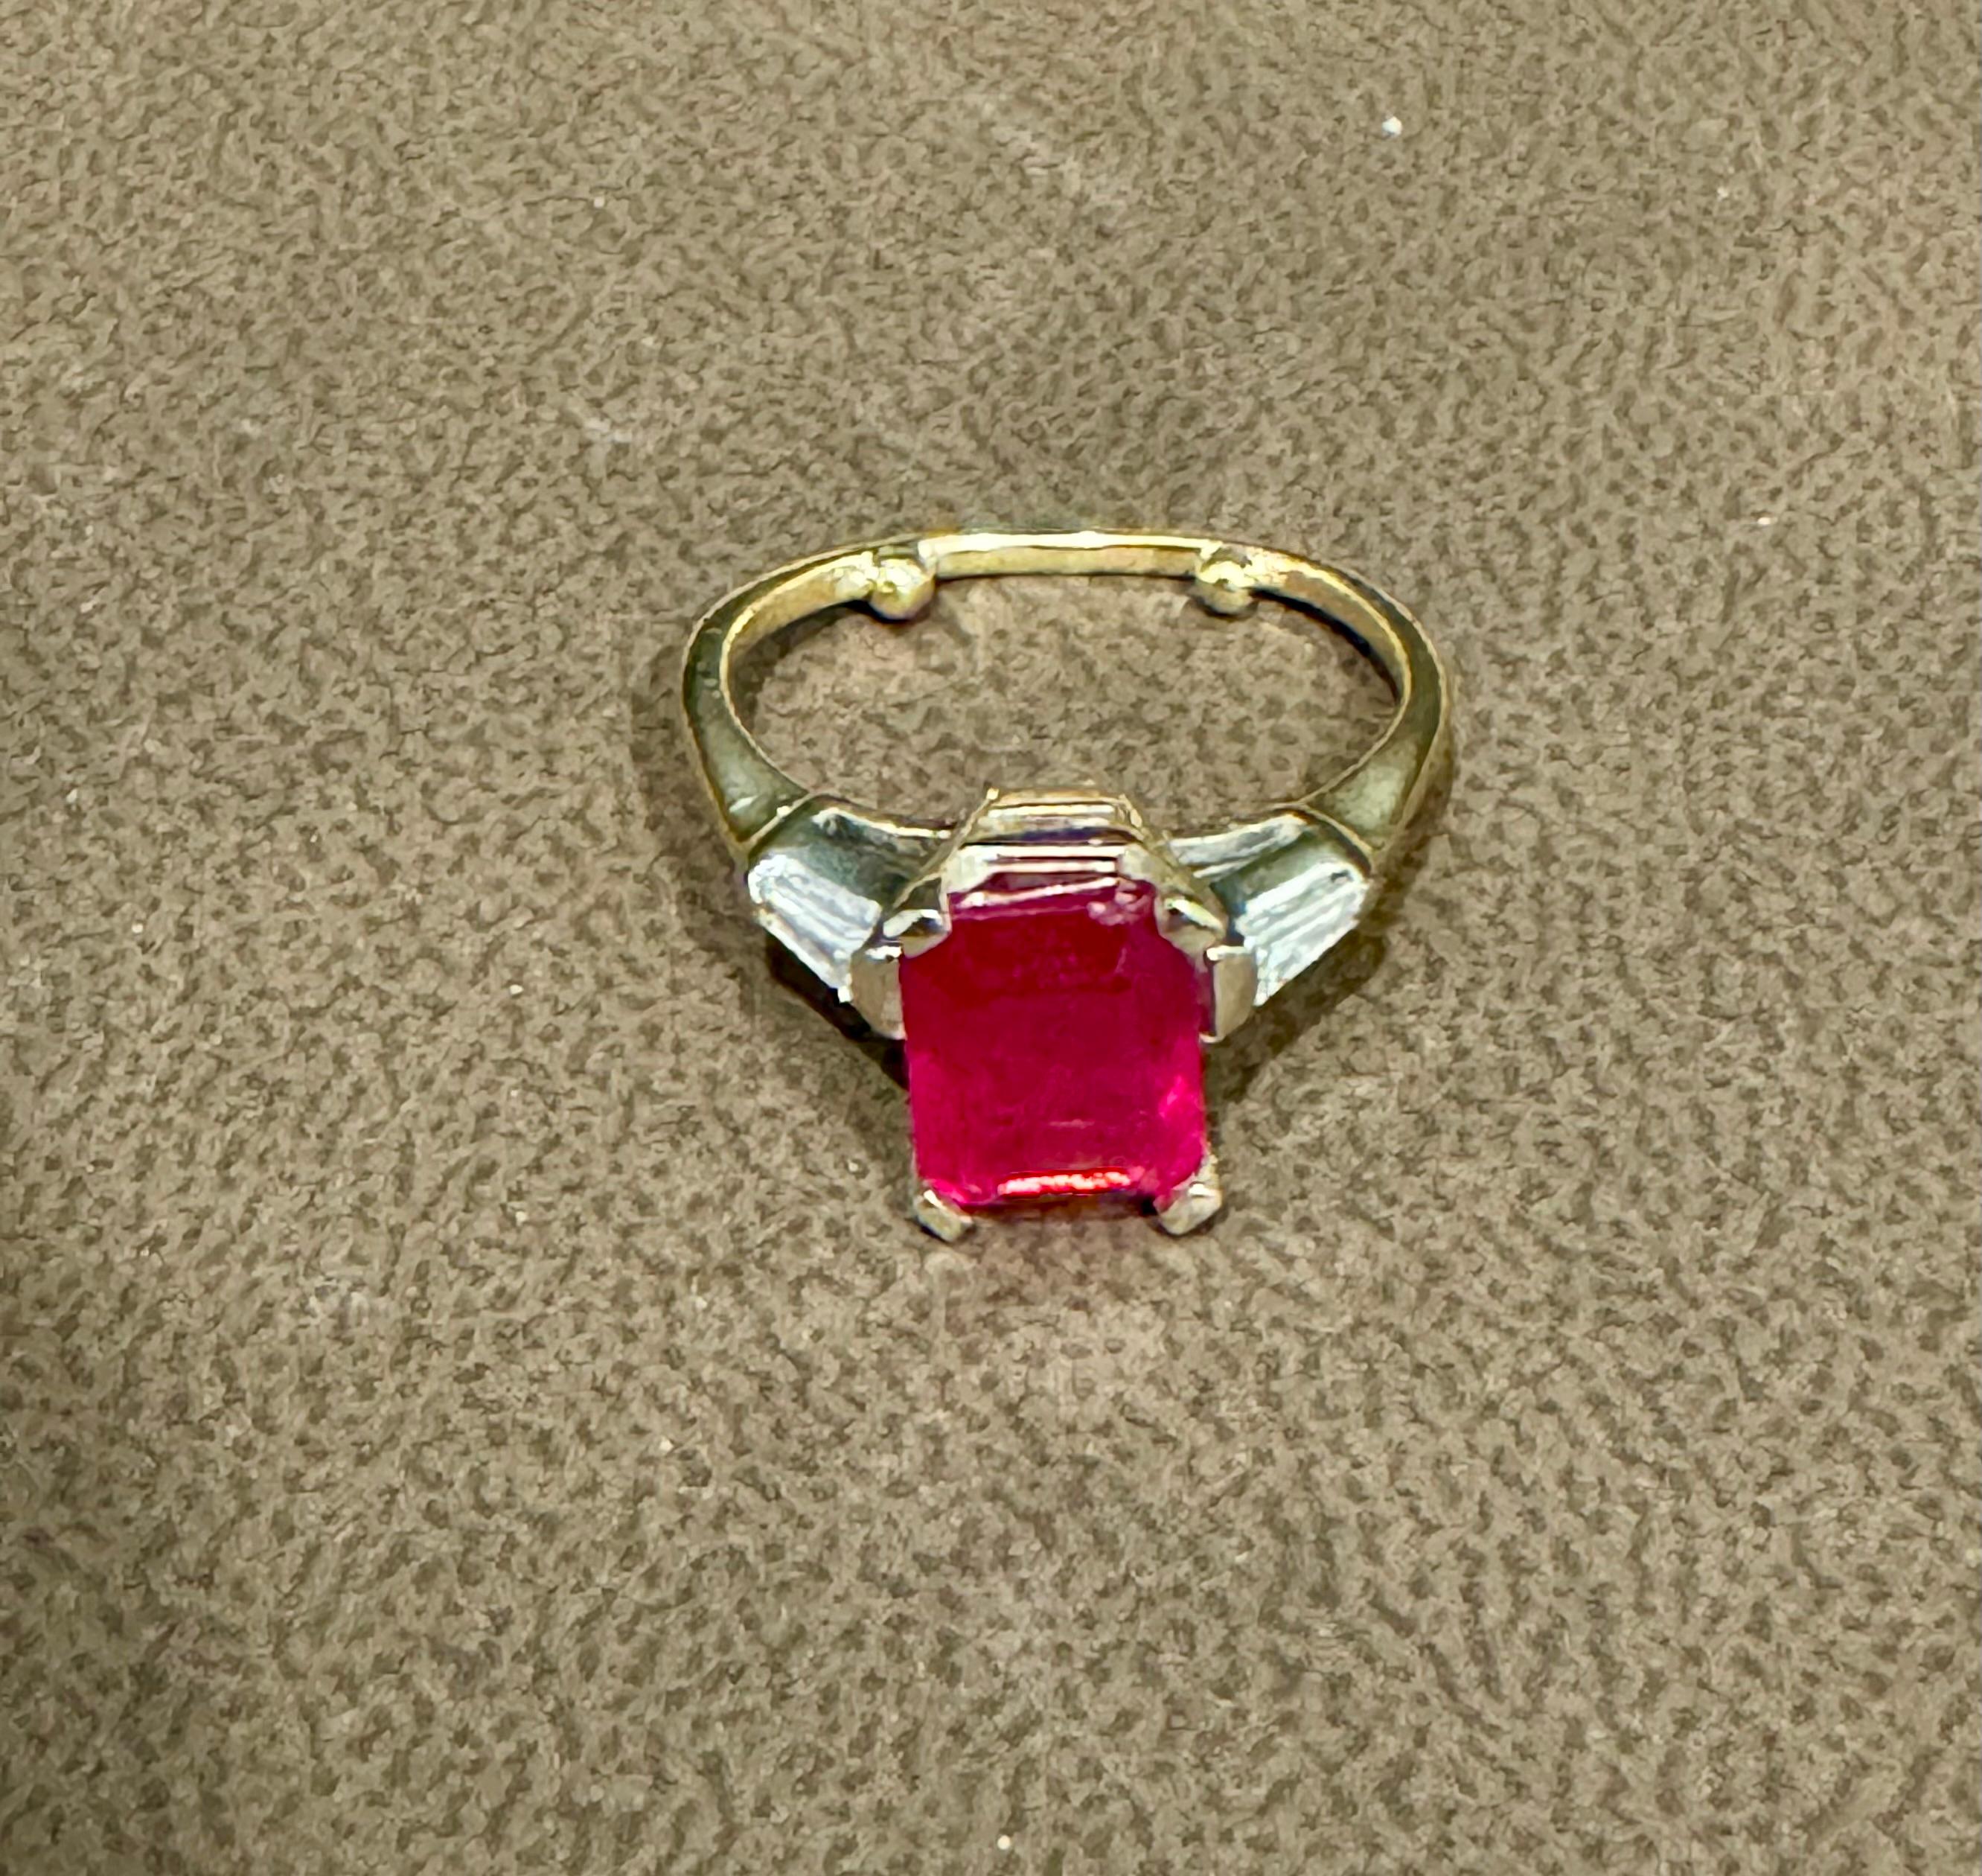 2.5 Ct Emerald Cut Treated Ruby & 0.15 ct Diamond Ring 14 Kt White Gold Size 5 en vente 2